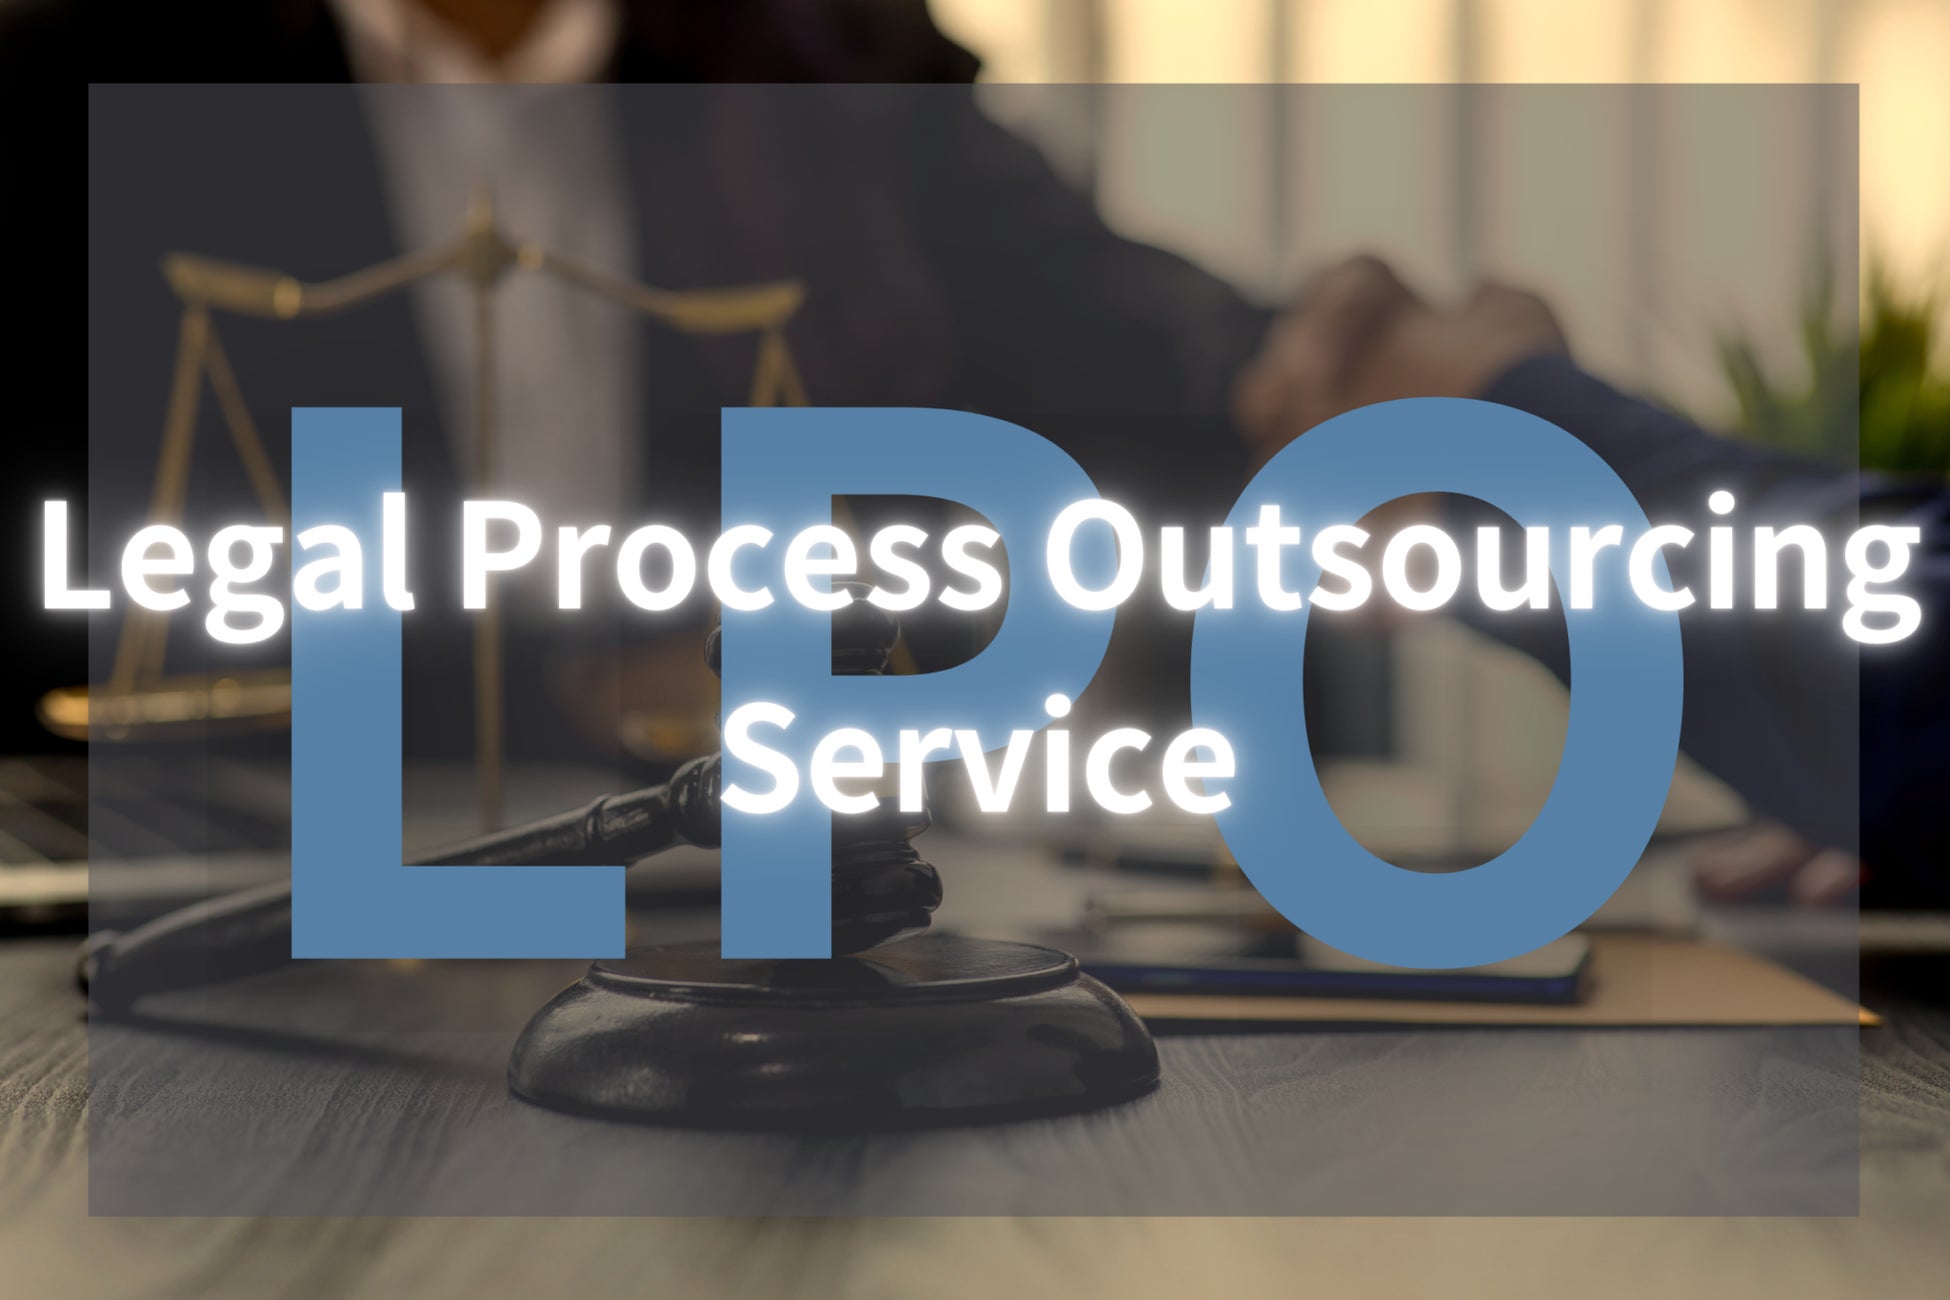 Legal Process Outsourcing Service